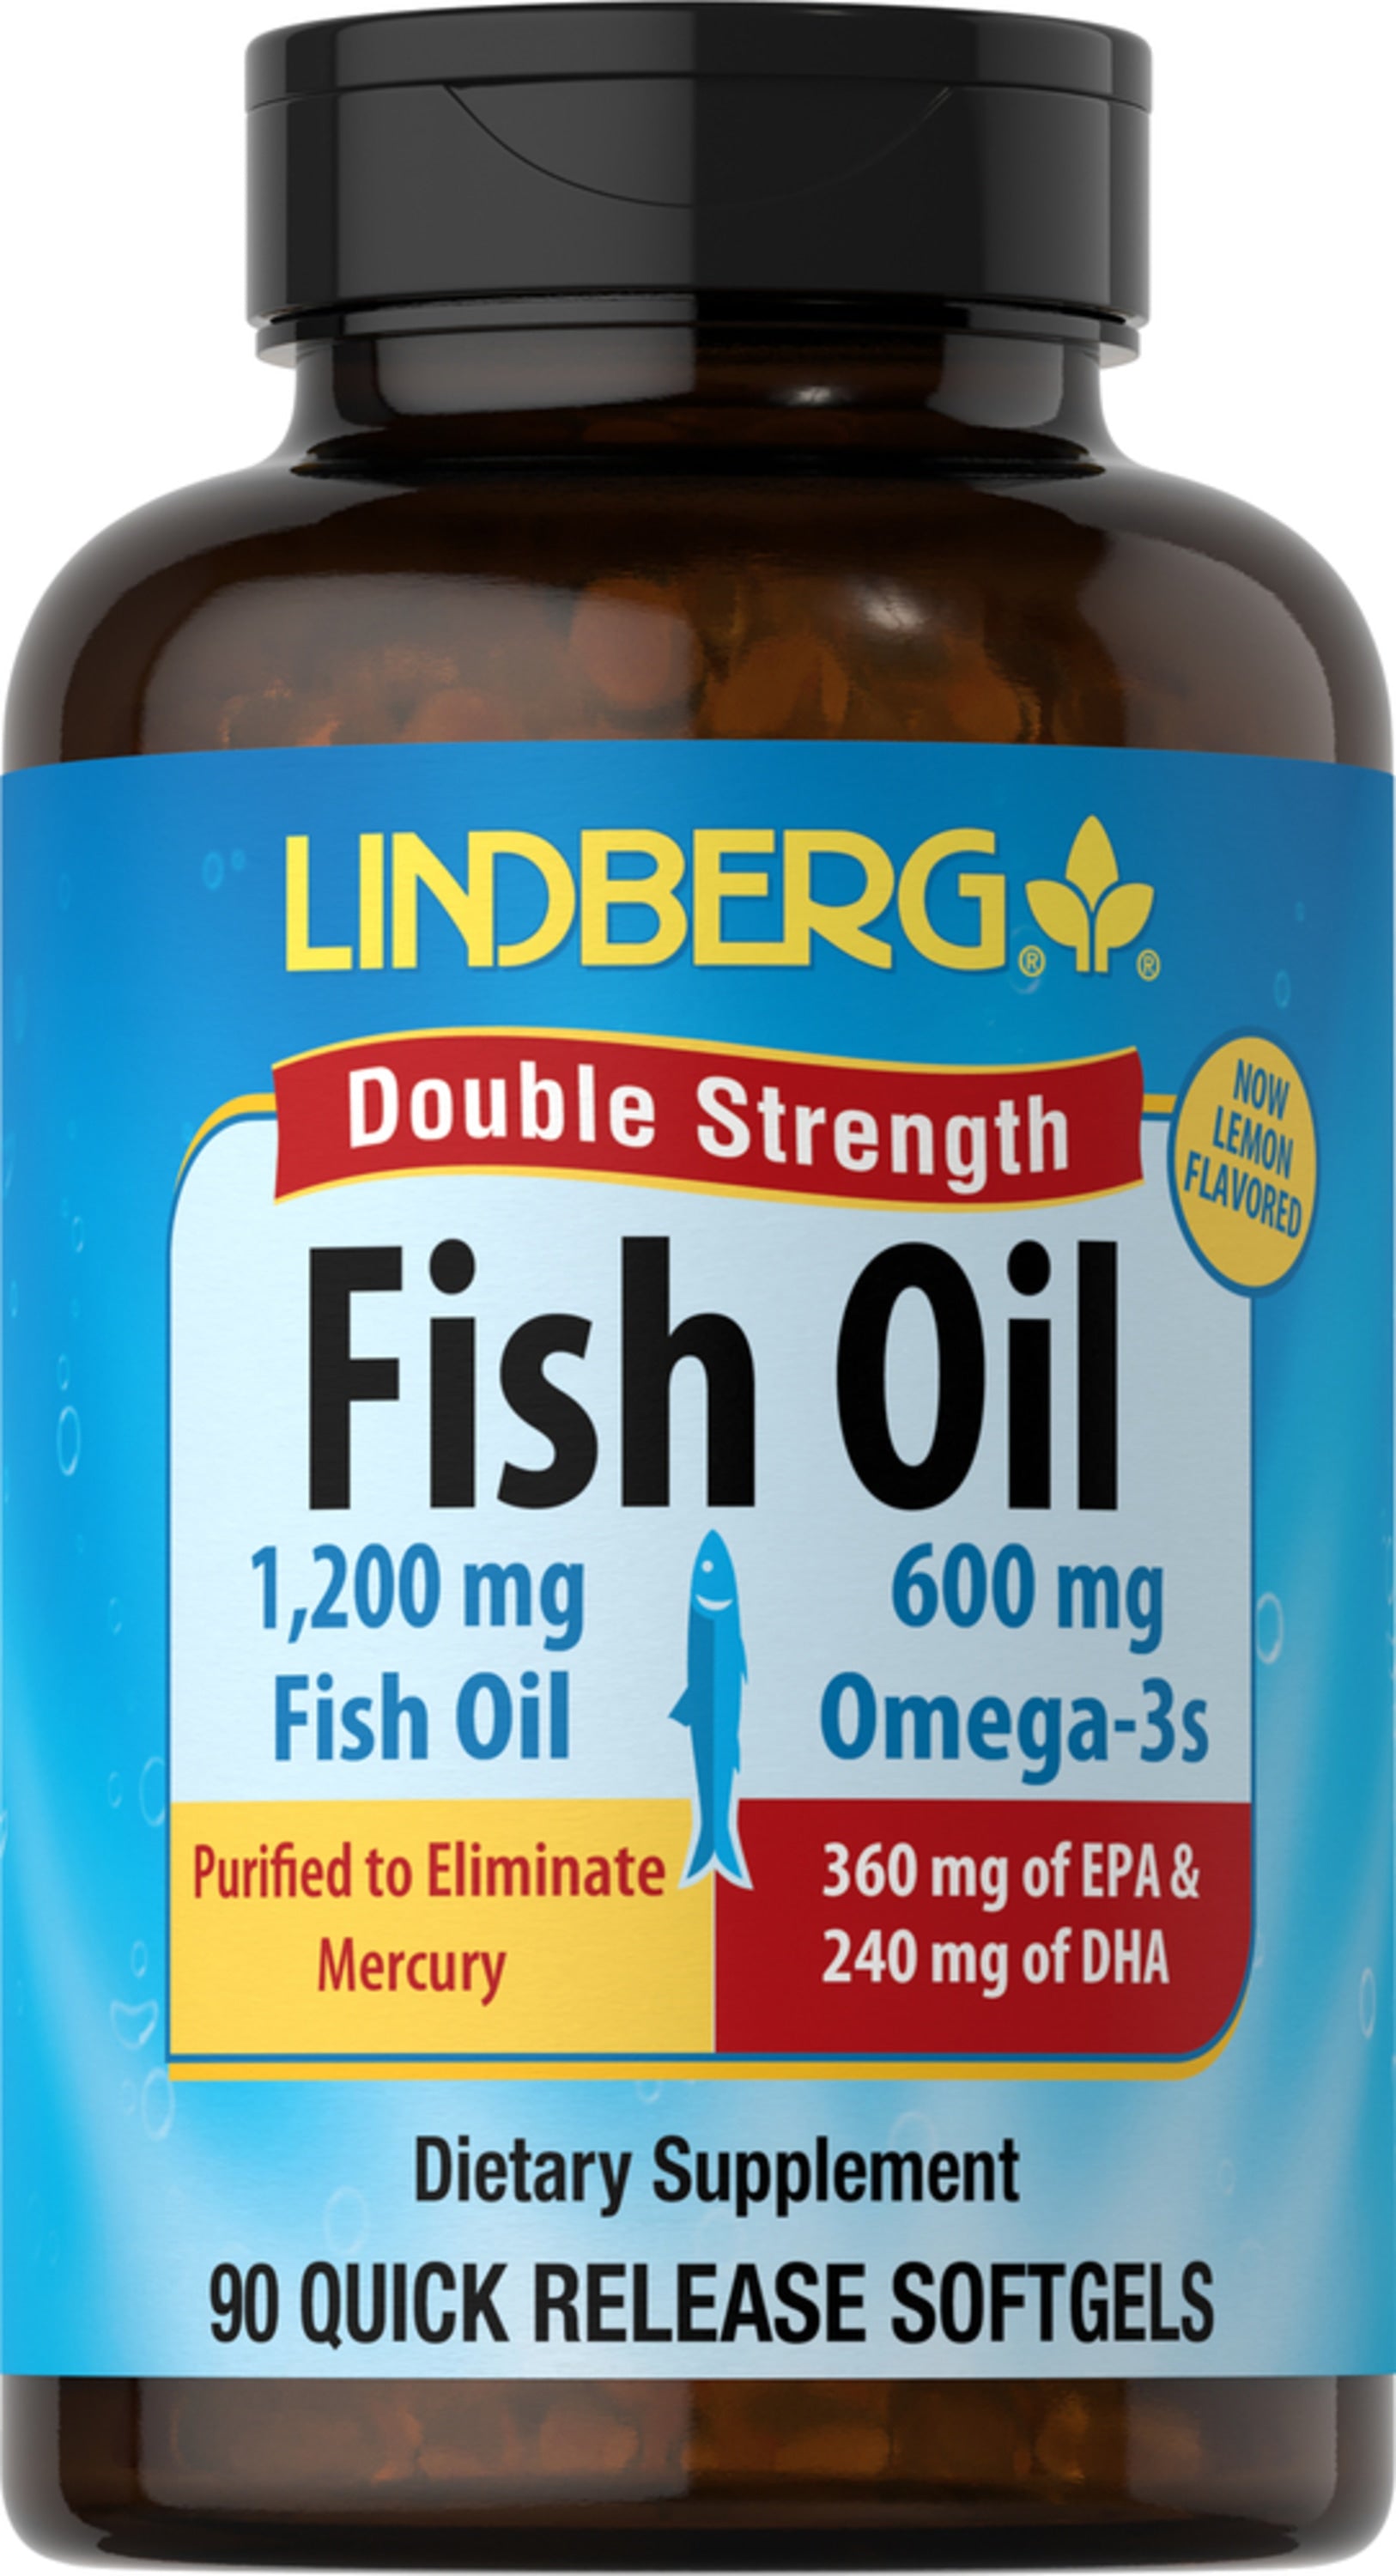 Omega-3 Fish Oil (Double Strength), 1200 mg, 90 Softgels